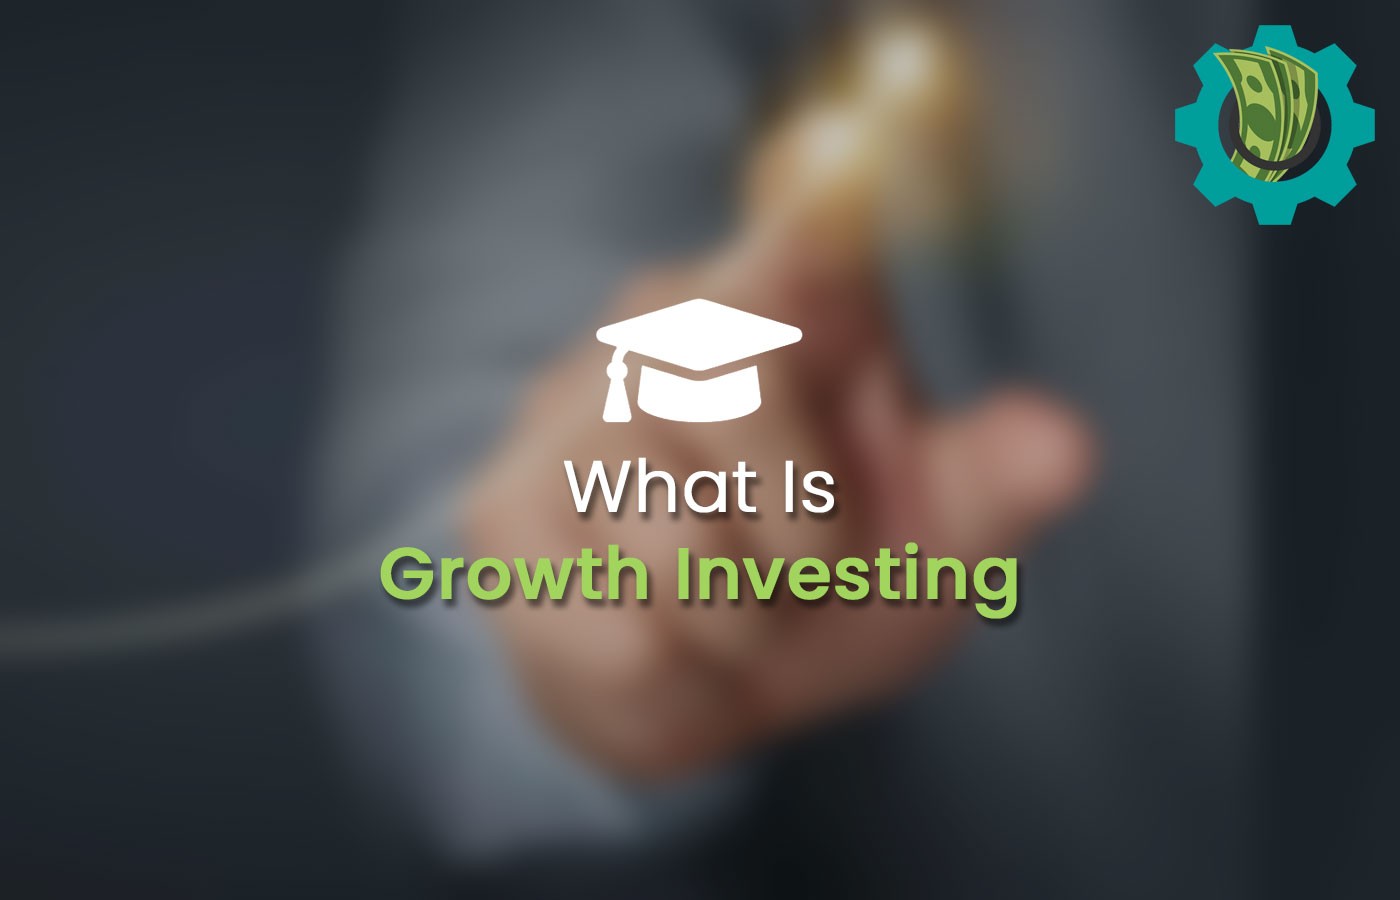 Investor executing a growth investing strategy